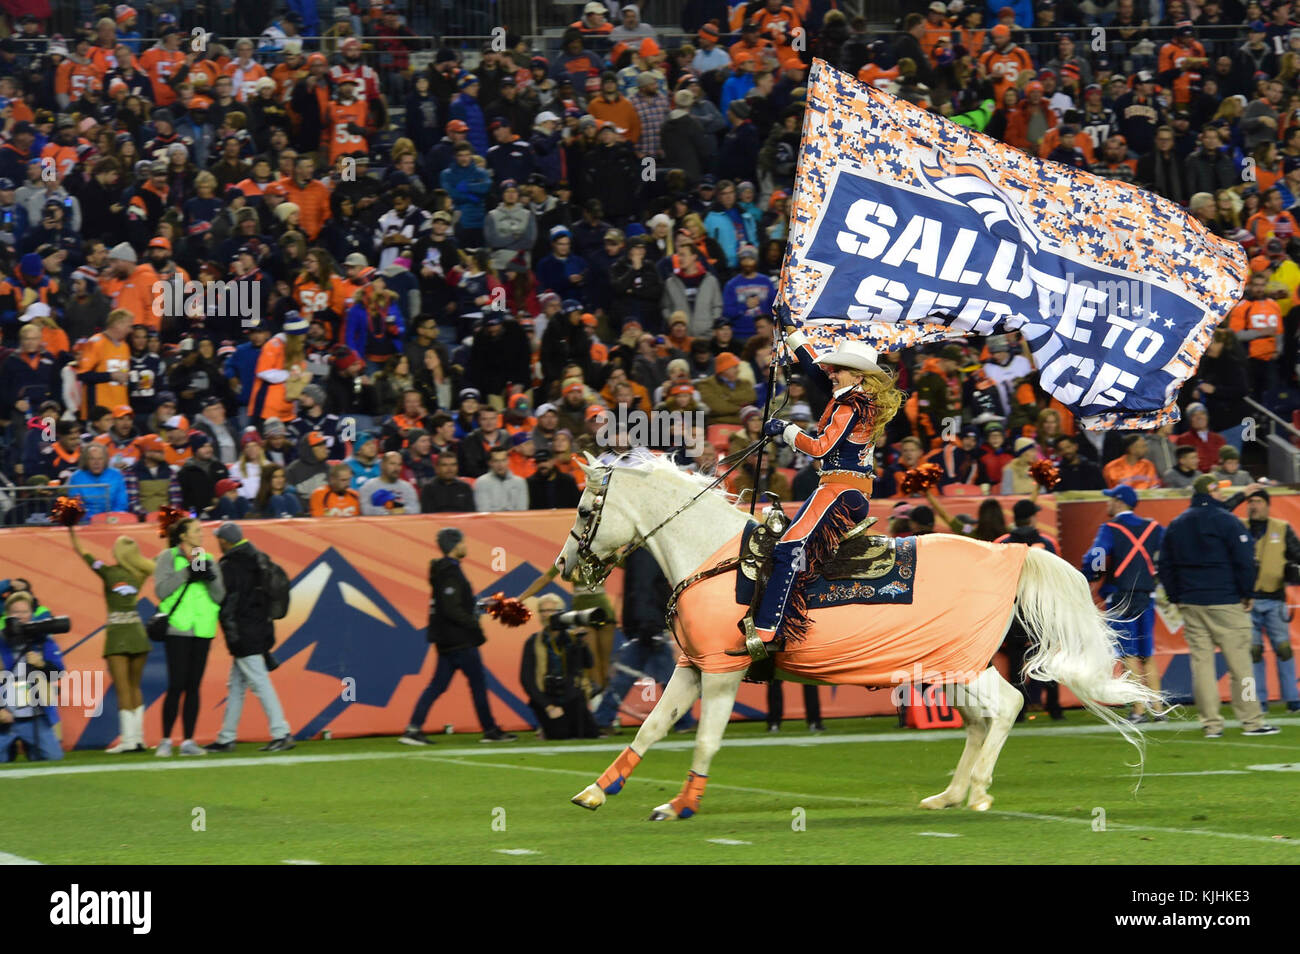 Thunder, Denver Bronco’s live mascot, runs onto the field during halftime while Ann Judge, Thunder’s trainer, holds a Salute to Service flag Nov. 12, 2017, at Sports Authority Stadium at Mile High in Denver. The Broncos, showing their respect, dedicated this game to honor all those who have served in the past and who currently serve in the U.S. military. (U.S. Air Force photo by Airman 1st Class Holden S. Faul/ Released) Stock Photo